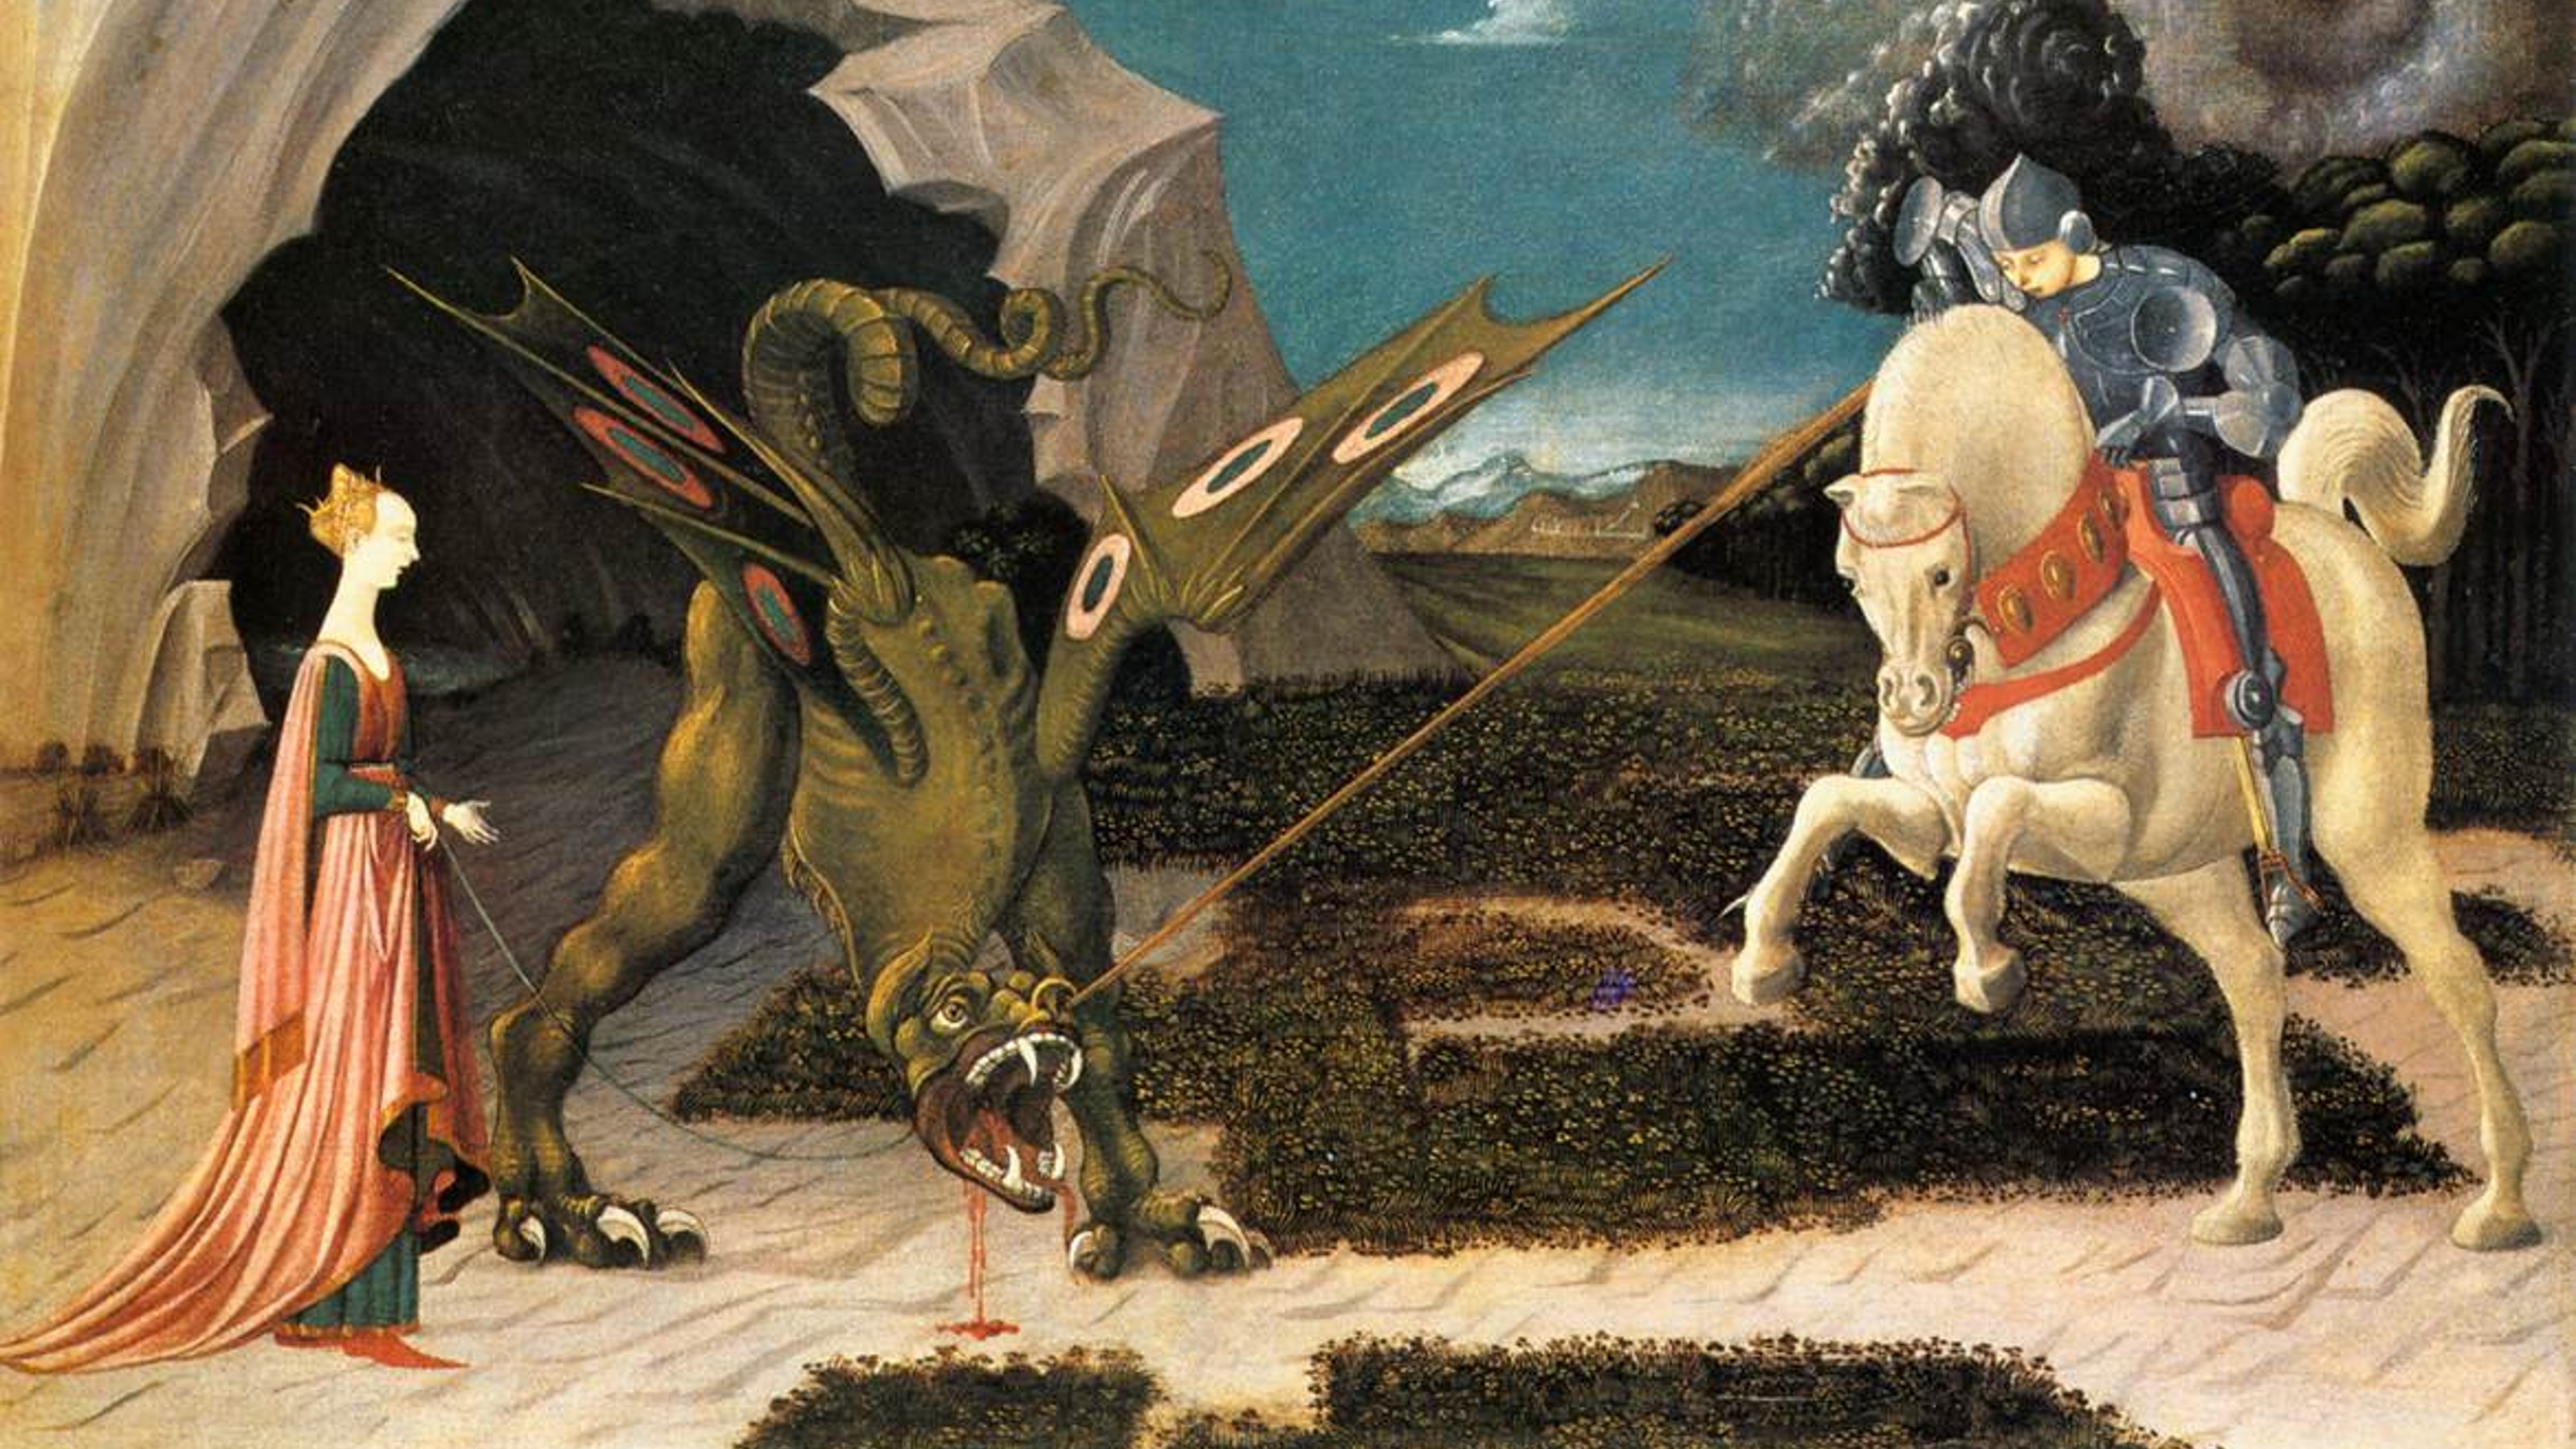 St. George and the Dragon as depicted in a 15th century painting